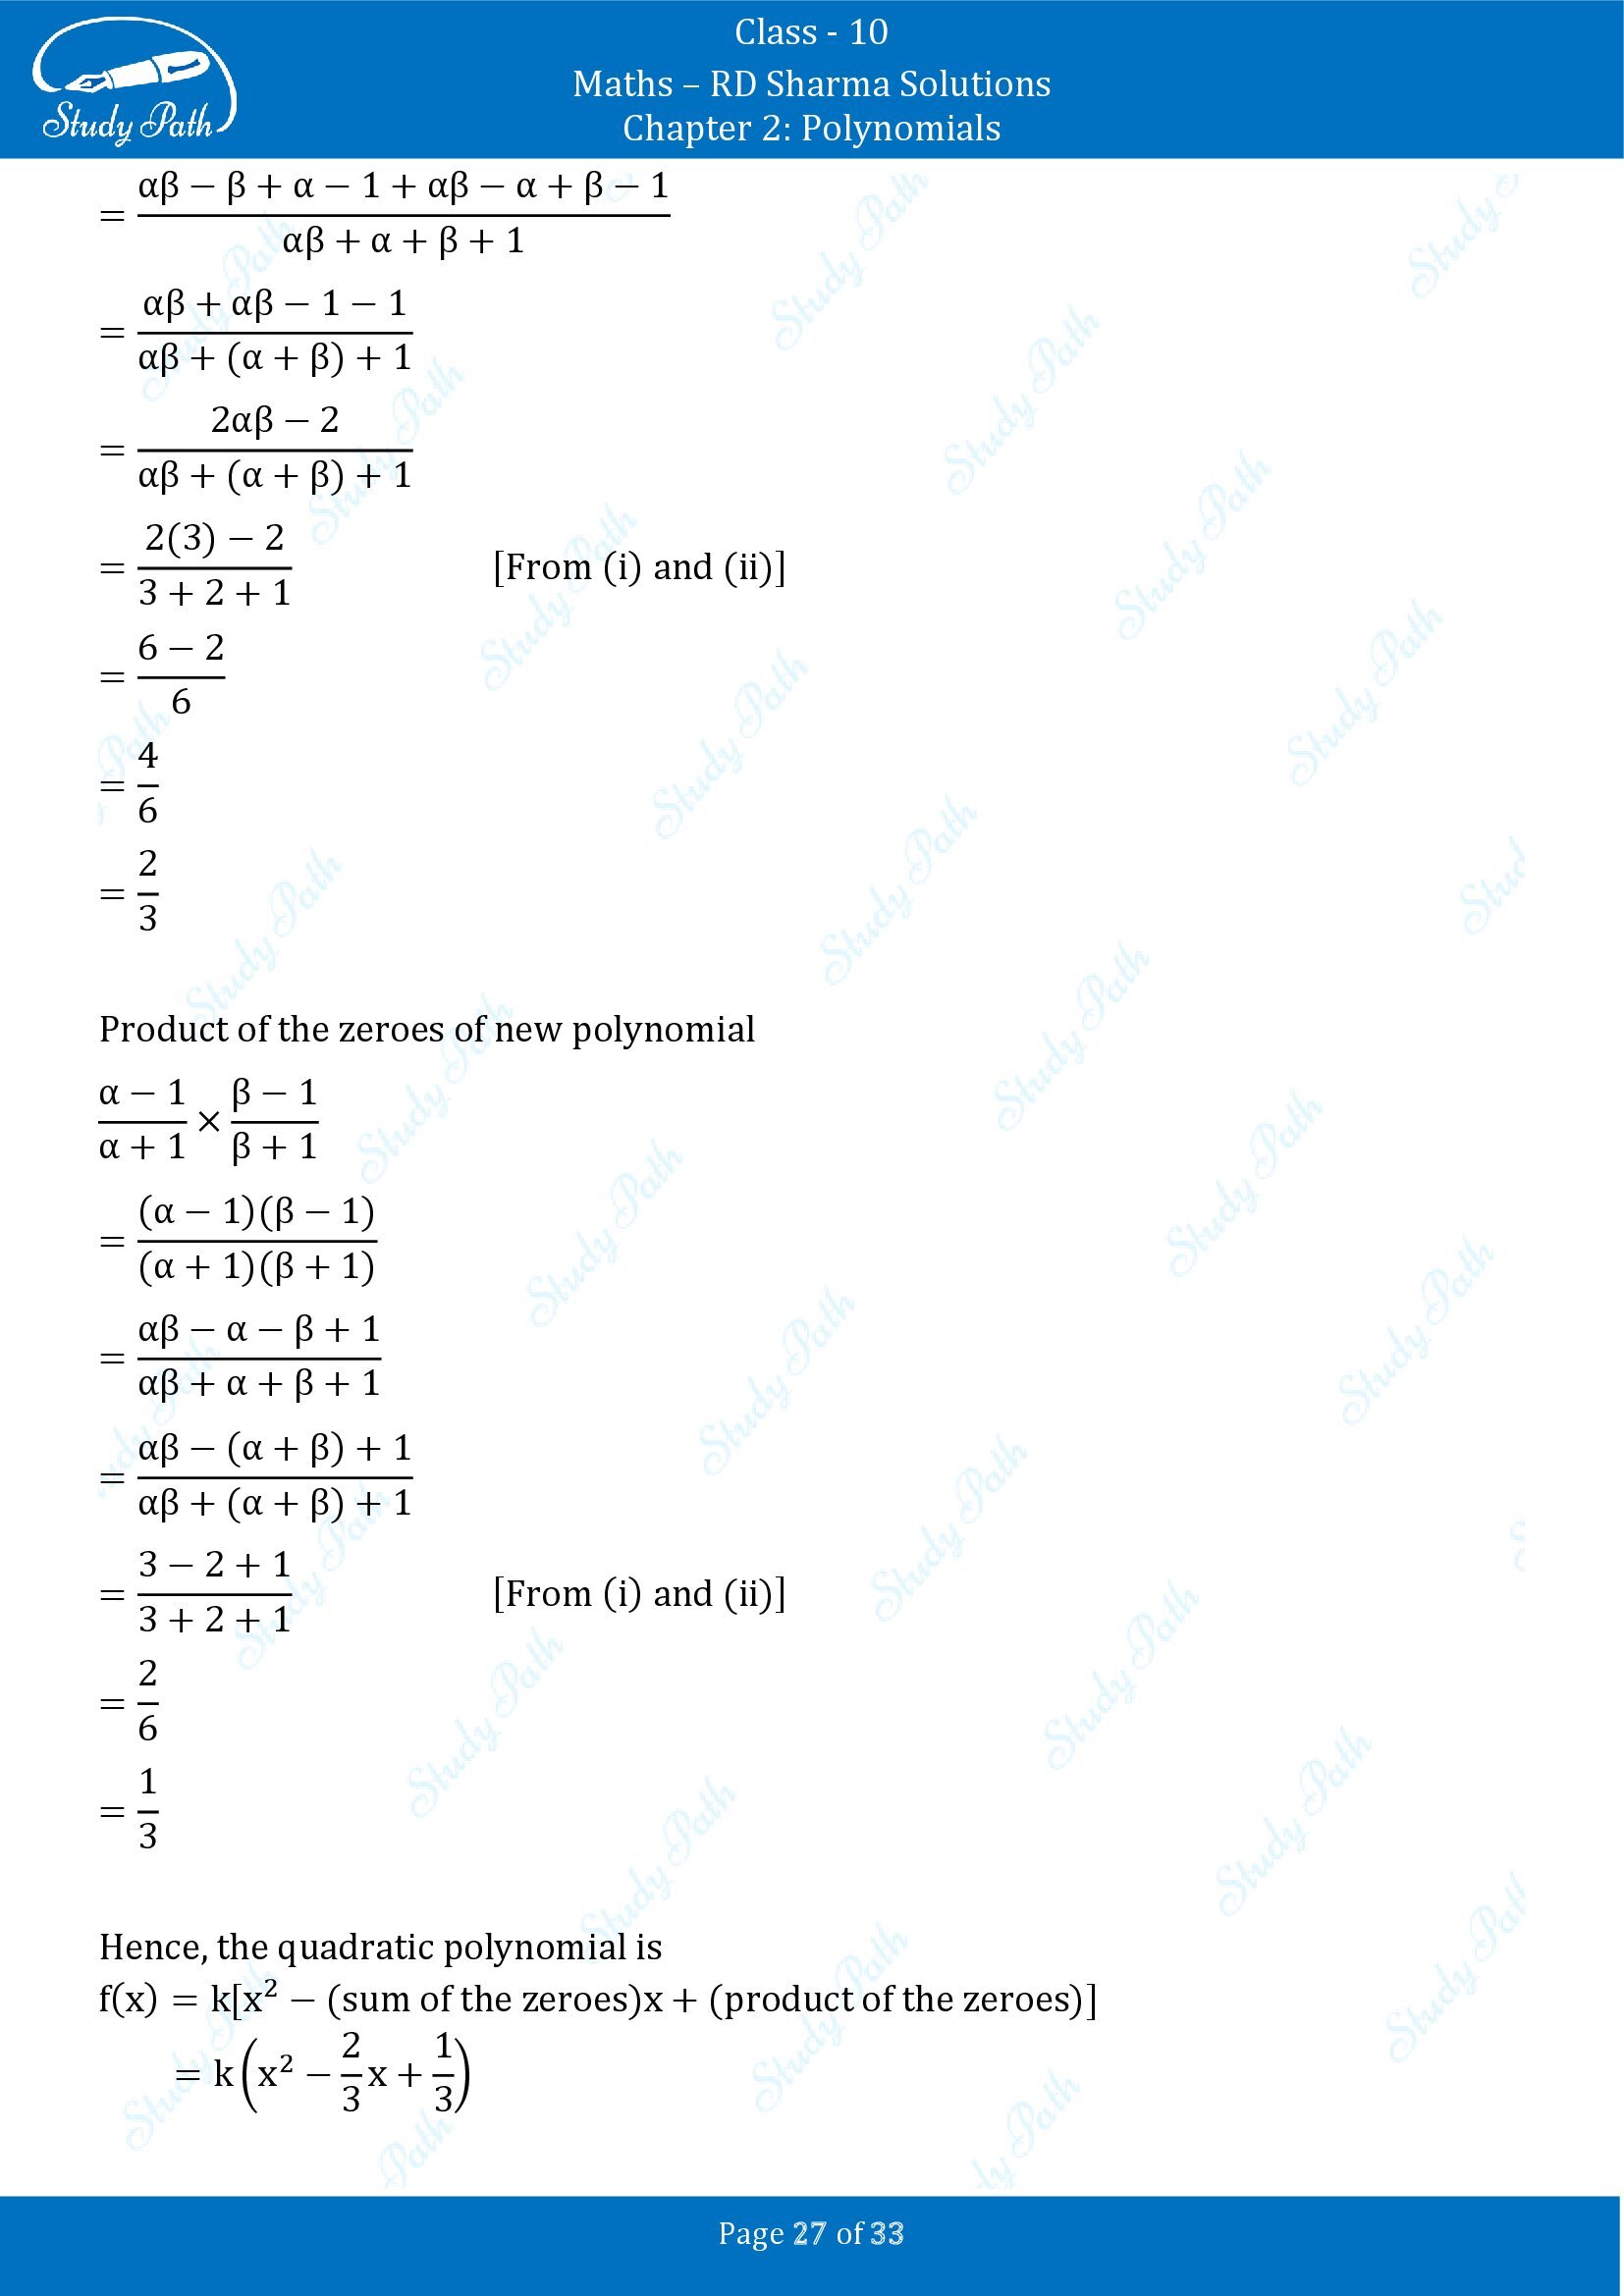 RD Sharma Solutions Class 10 Chapter 2 Polynomials Exercise 2.1 00027